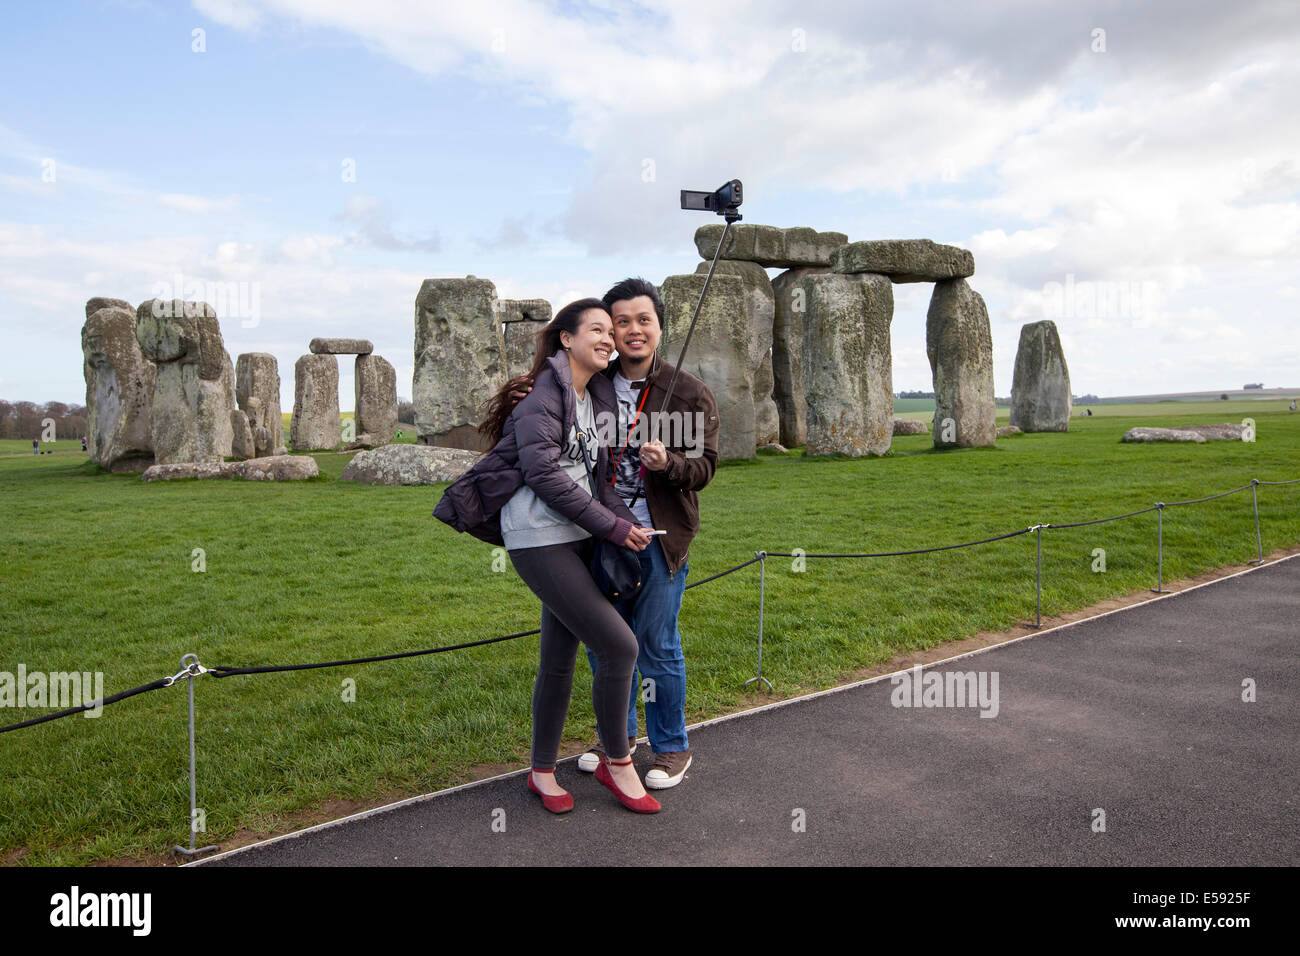 Tourists photograph themselves and the stones at the standing stone circle at Stonehenge, Wiltshire, UK Stock Photo